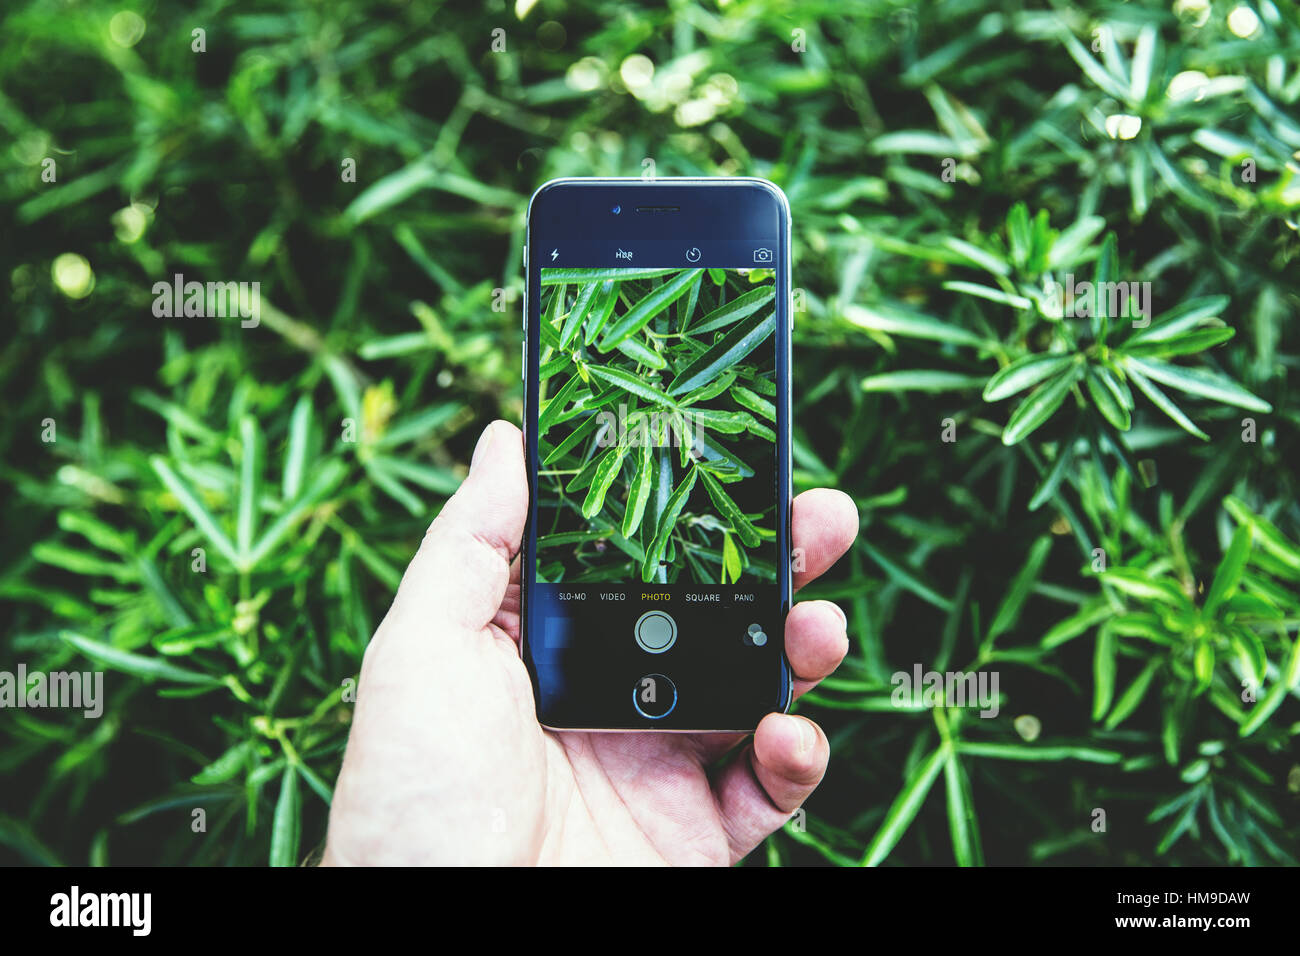 Man taking photo of plant with his mobile camera phone Stock Photo